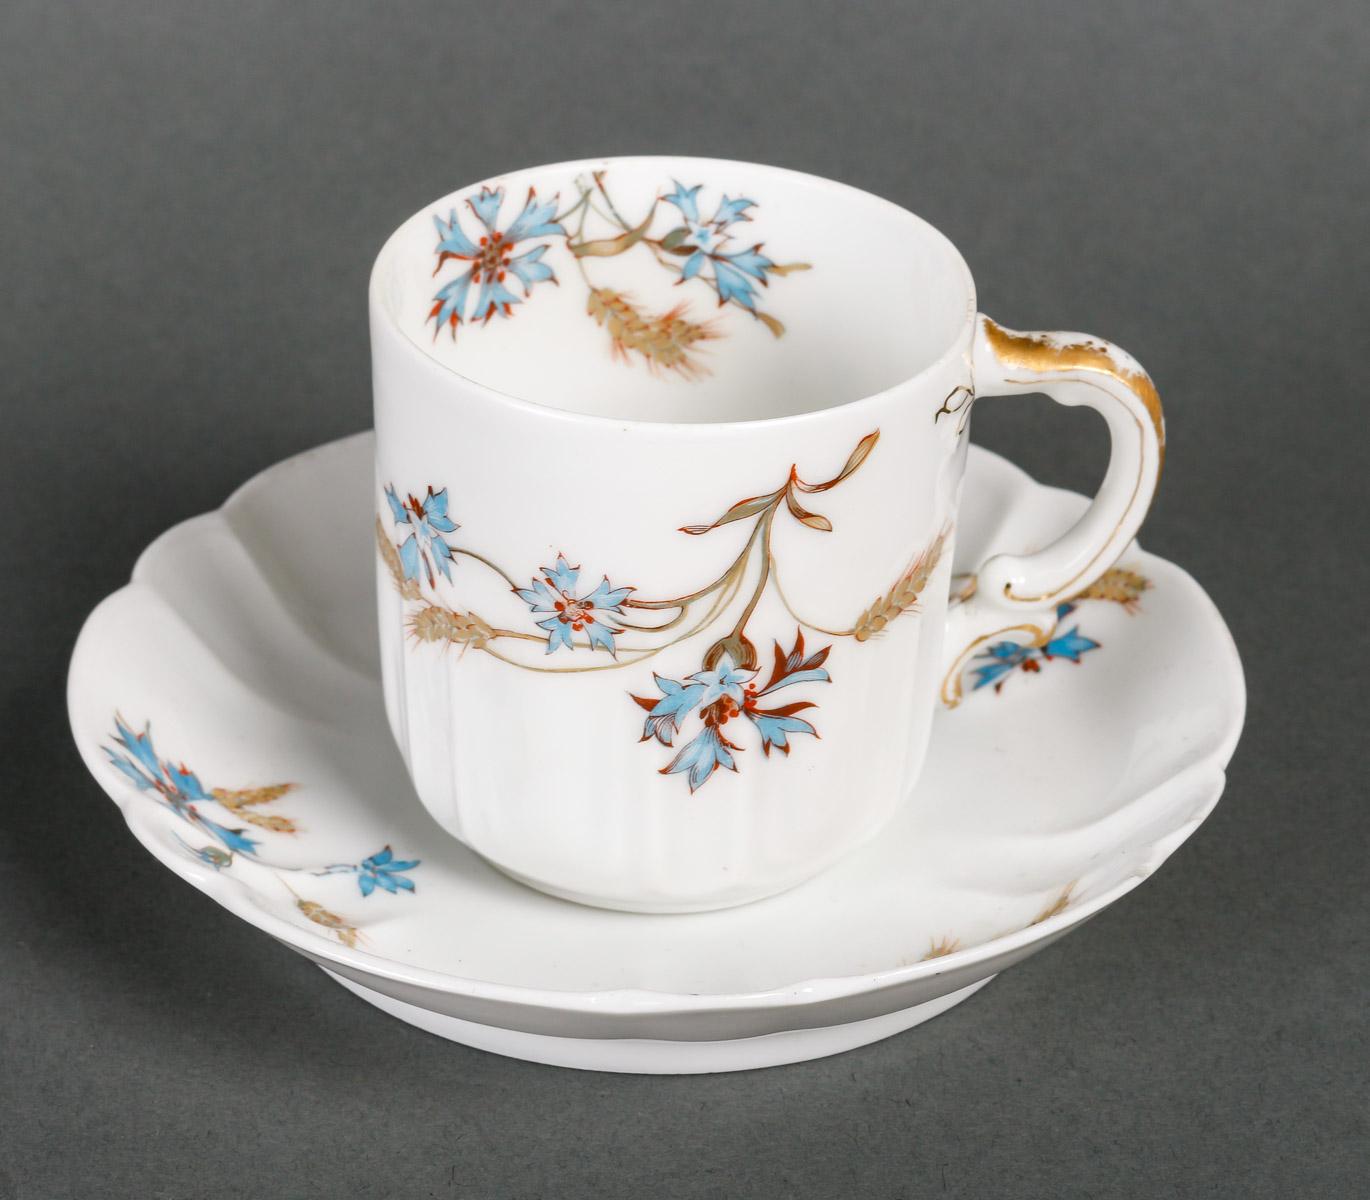 20th Century Limoges Porcelain Tea and Coffee Set. For Sale